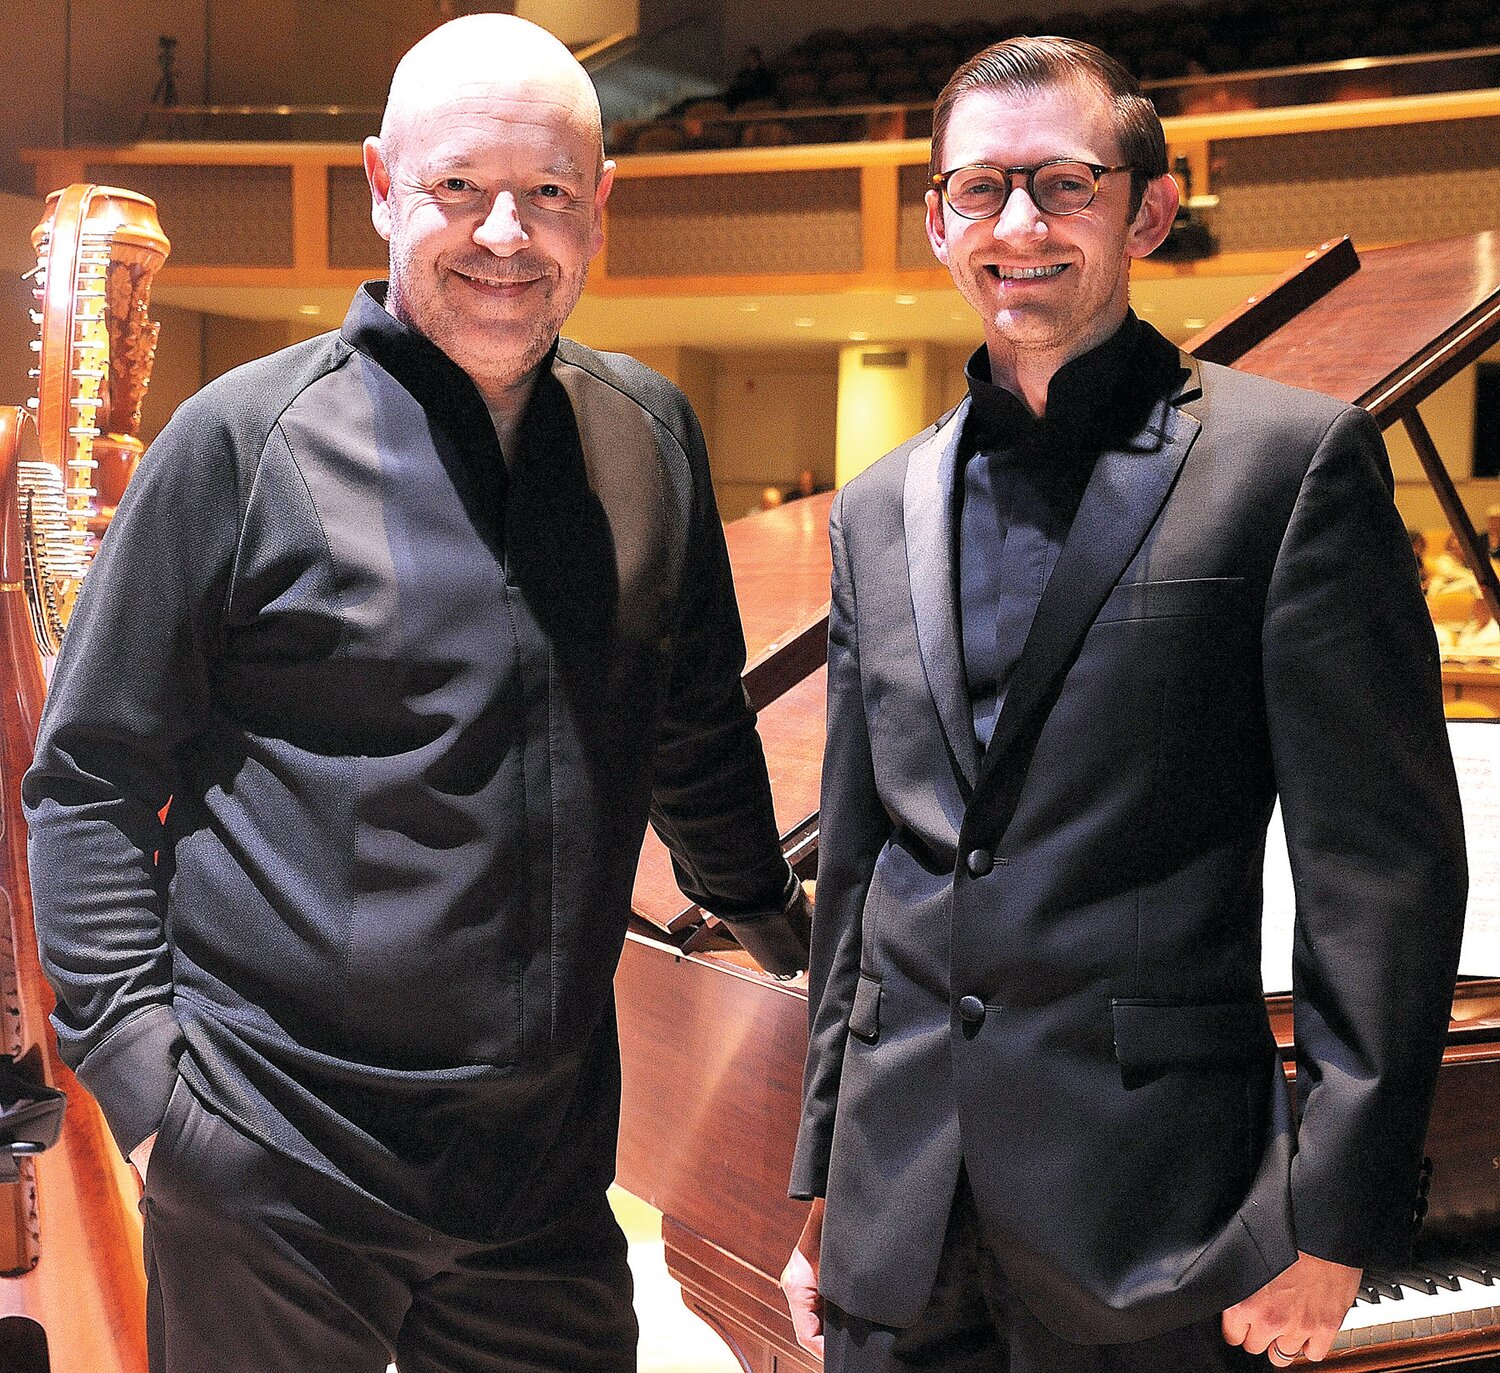 Bucks County Symphony Orchestra Music Director Jose Dominguez, left, stands with Assistant Conductor Sebastian Grand.